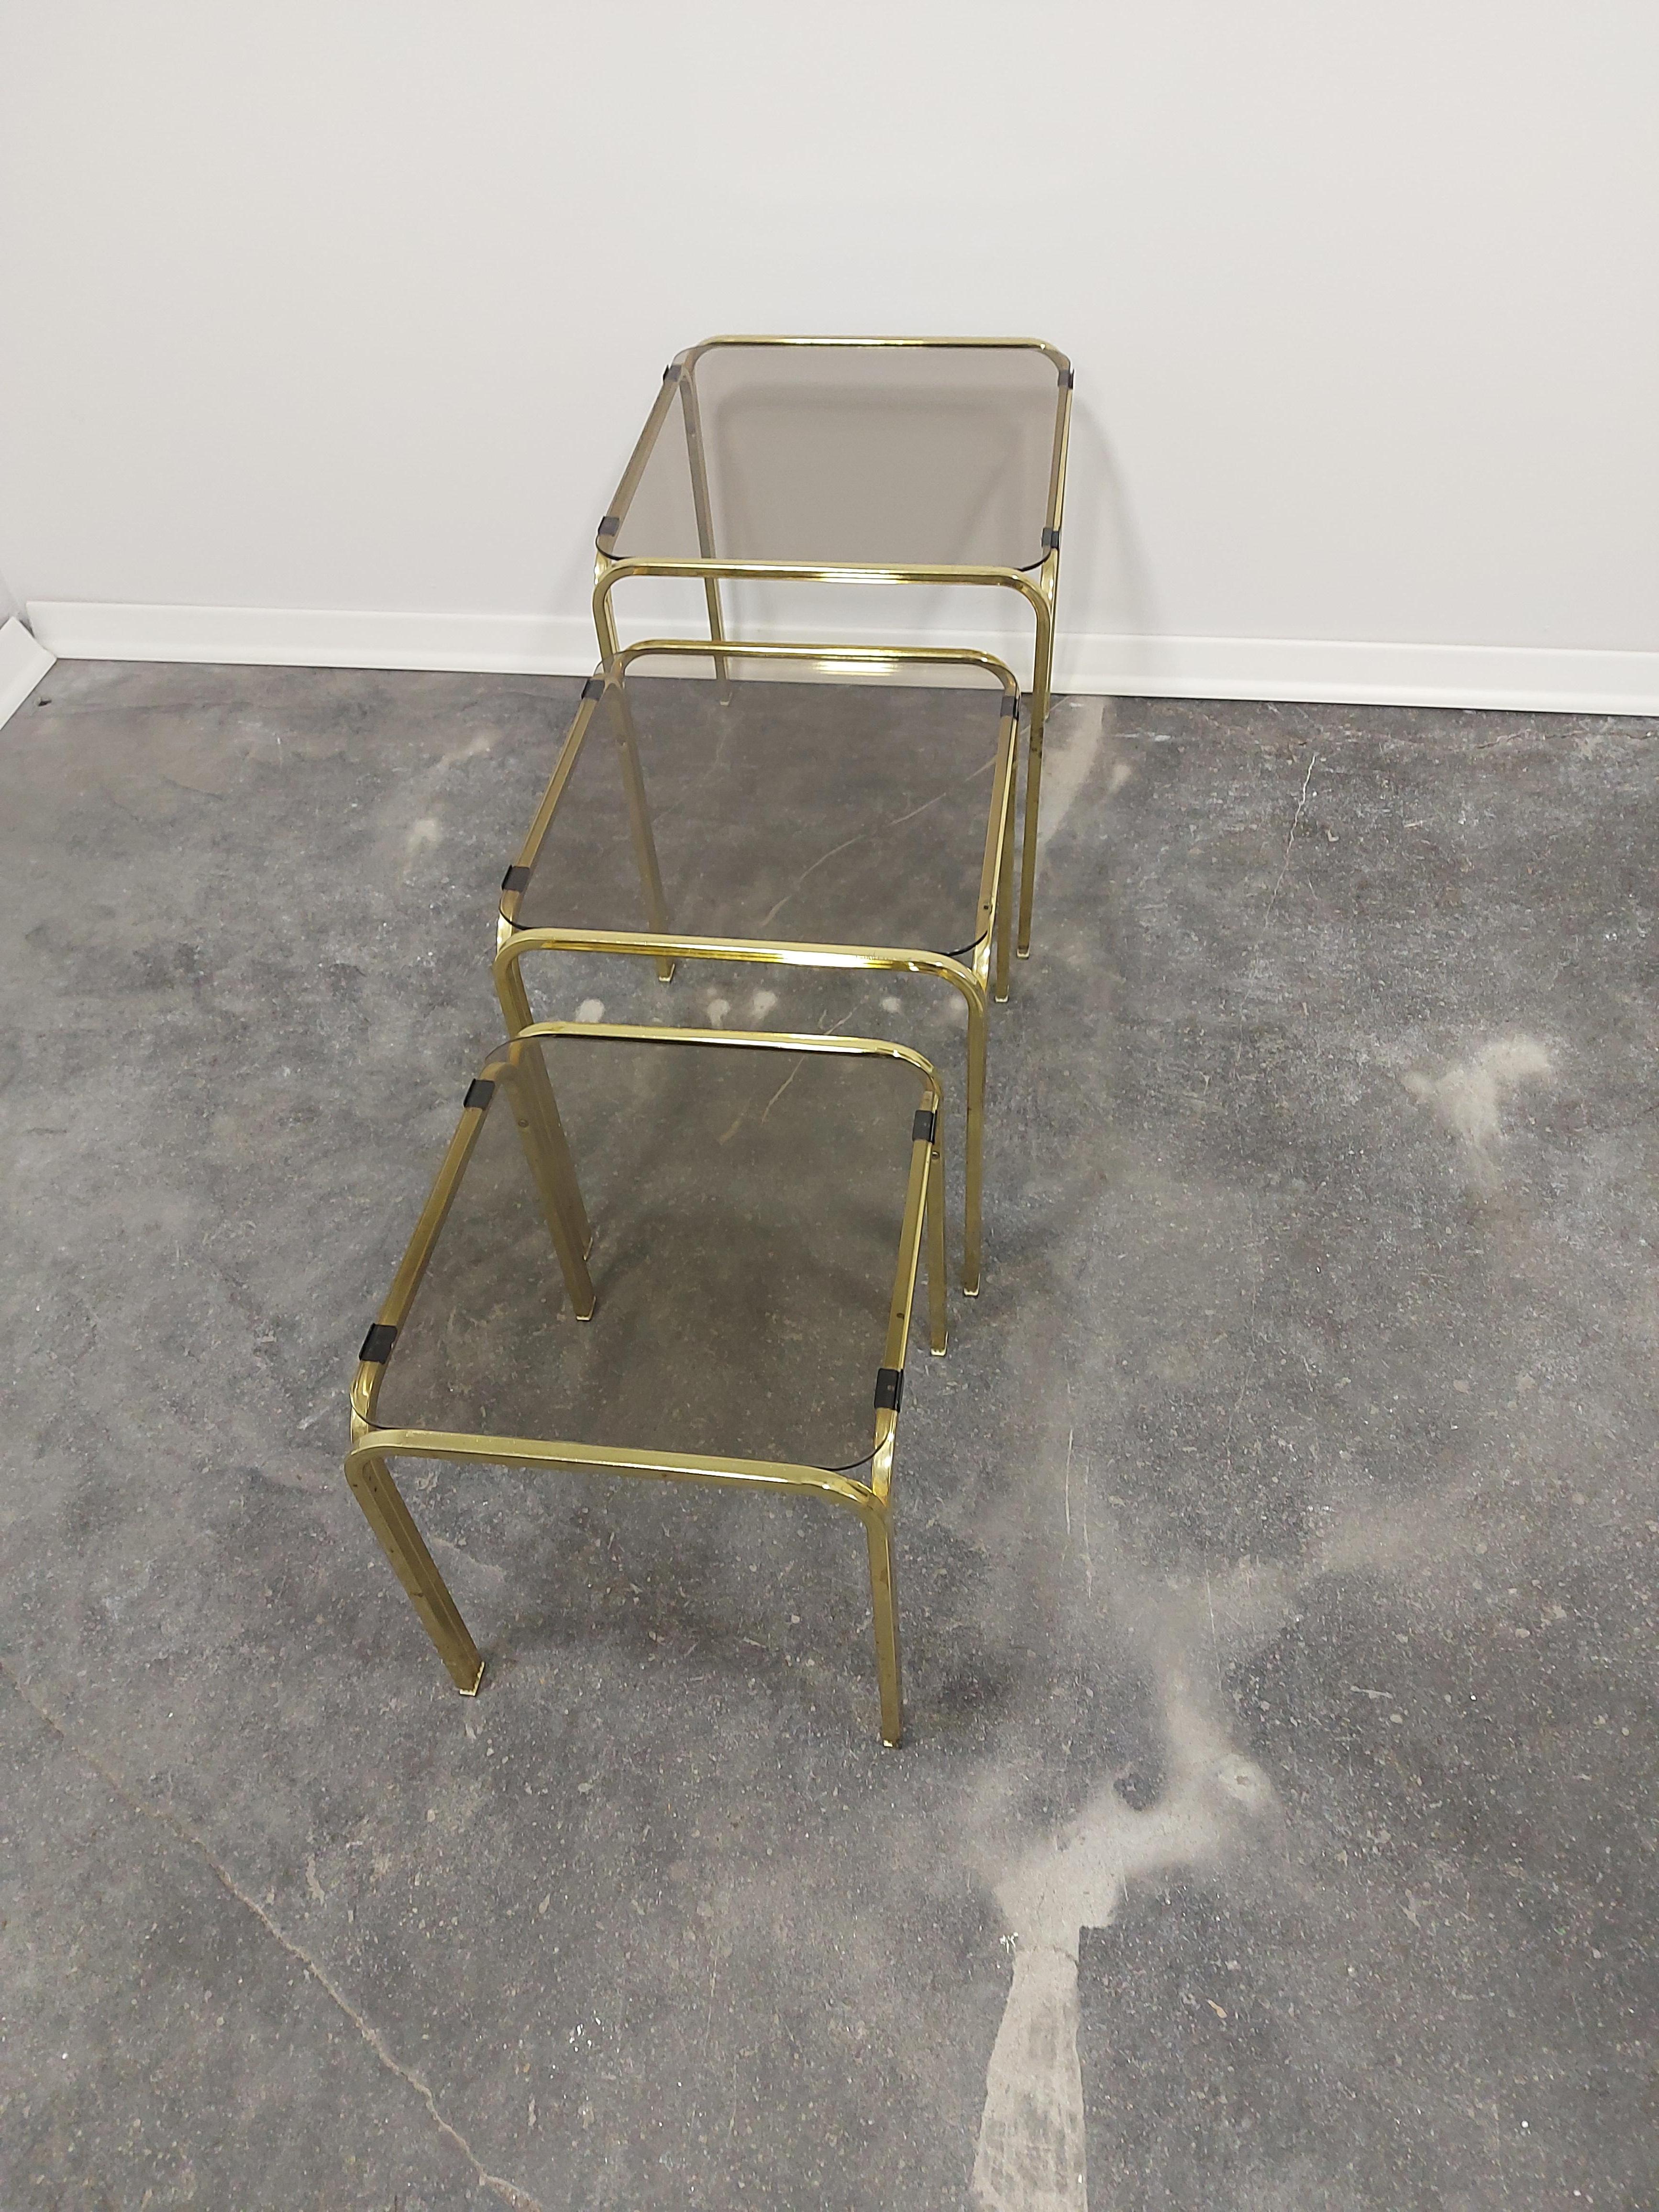 Slovenian Brass and Smoked Glass Nesting Tables, Set of 3, 1970s For Sale